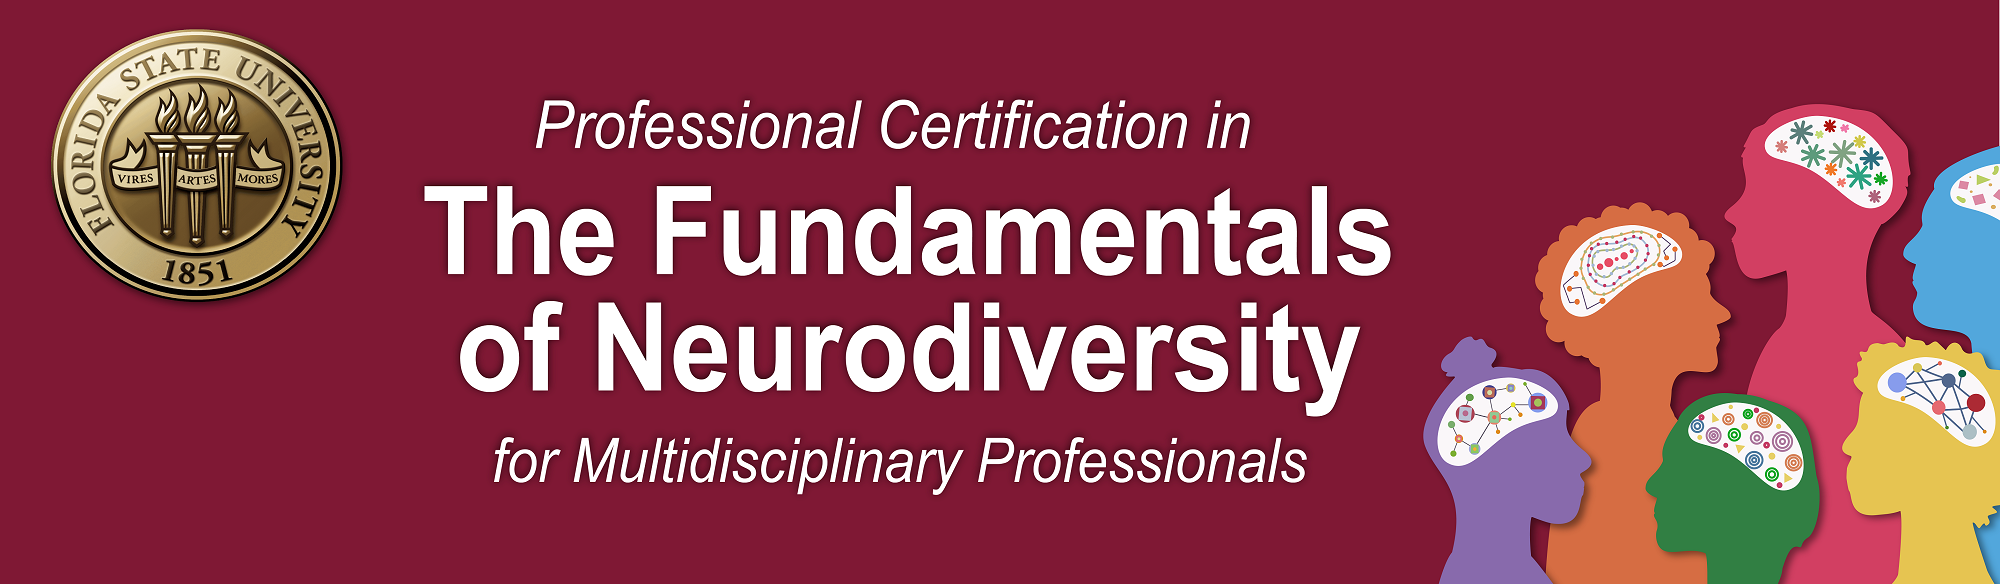 Title banner for fundamentals of neurodiversity